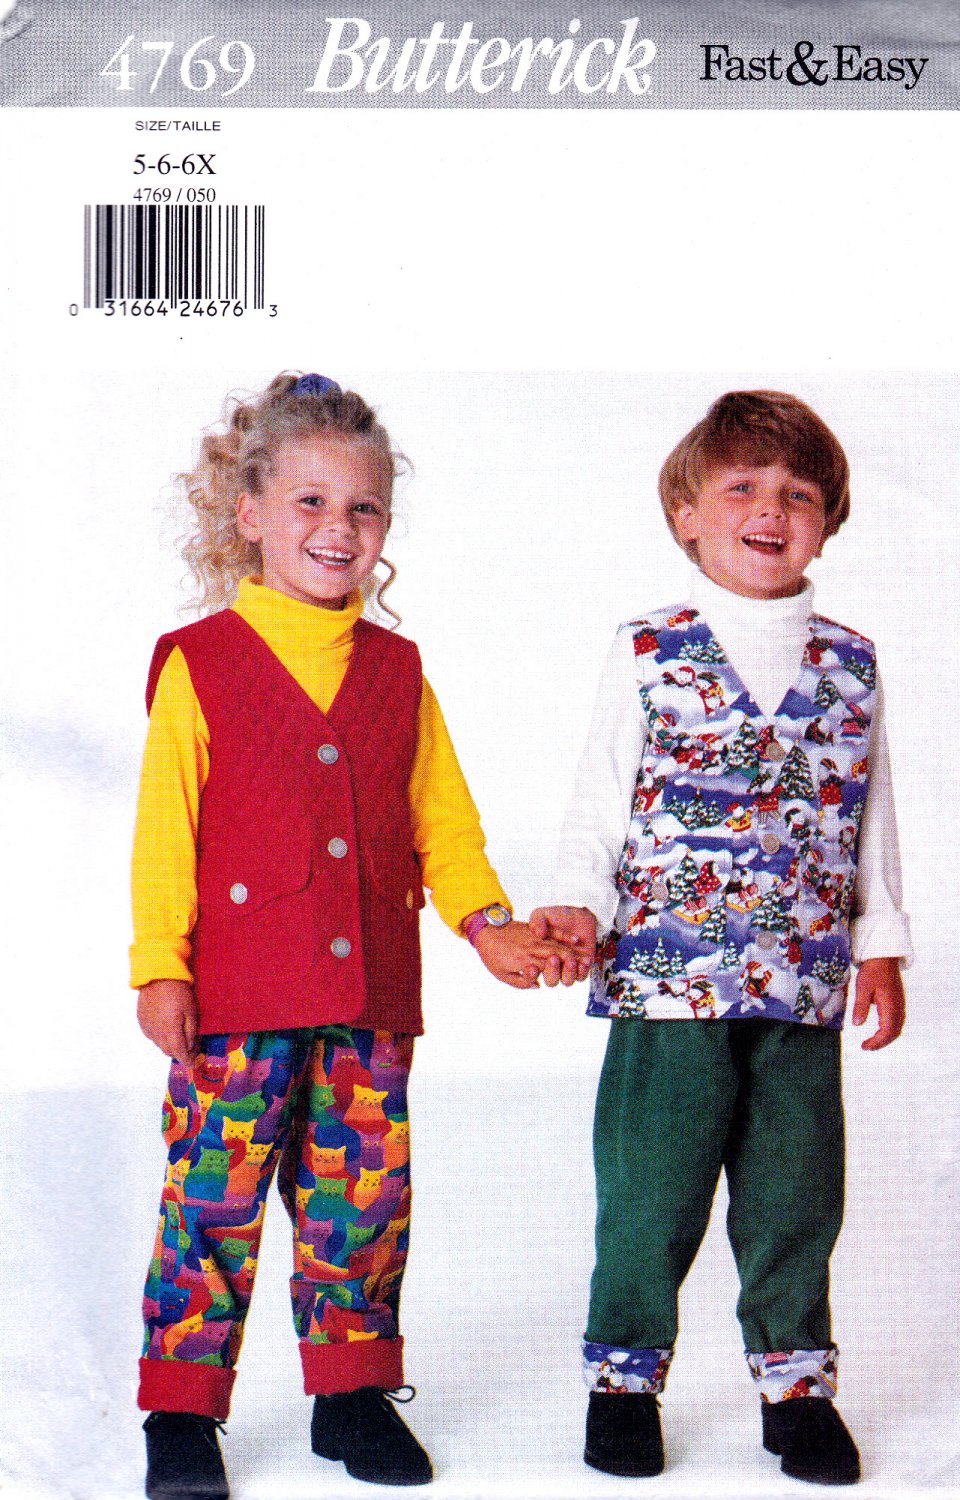 Butterick 4769 B4769 Girls Boys Sewing Pattern Childrens Vests Pants Kids Sizes 5-6-6x Easy Sew